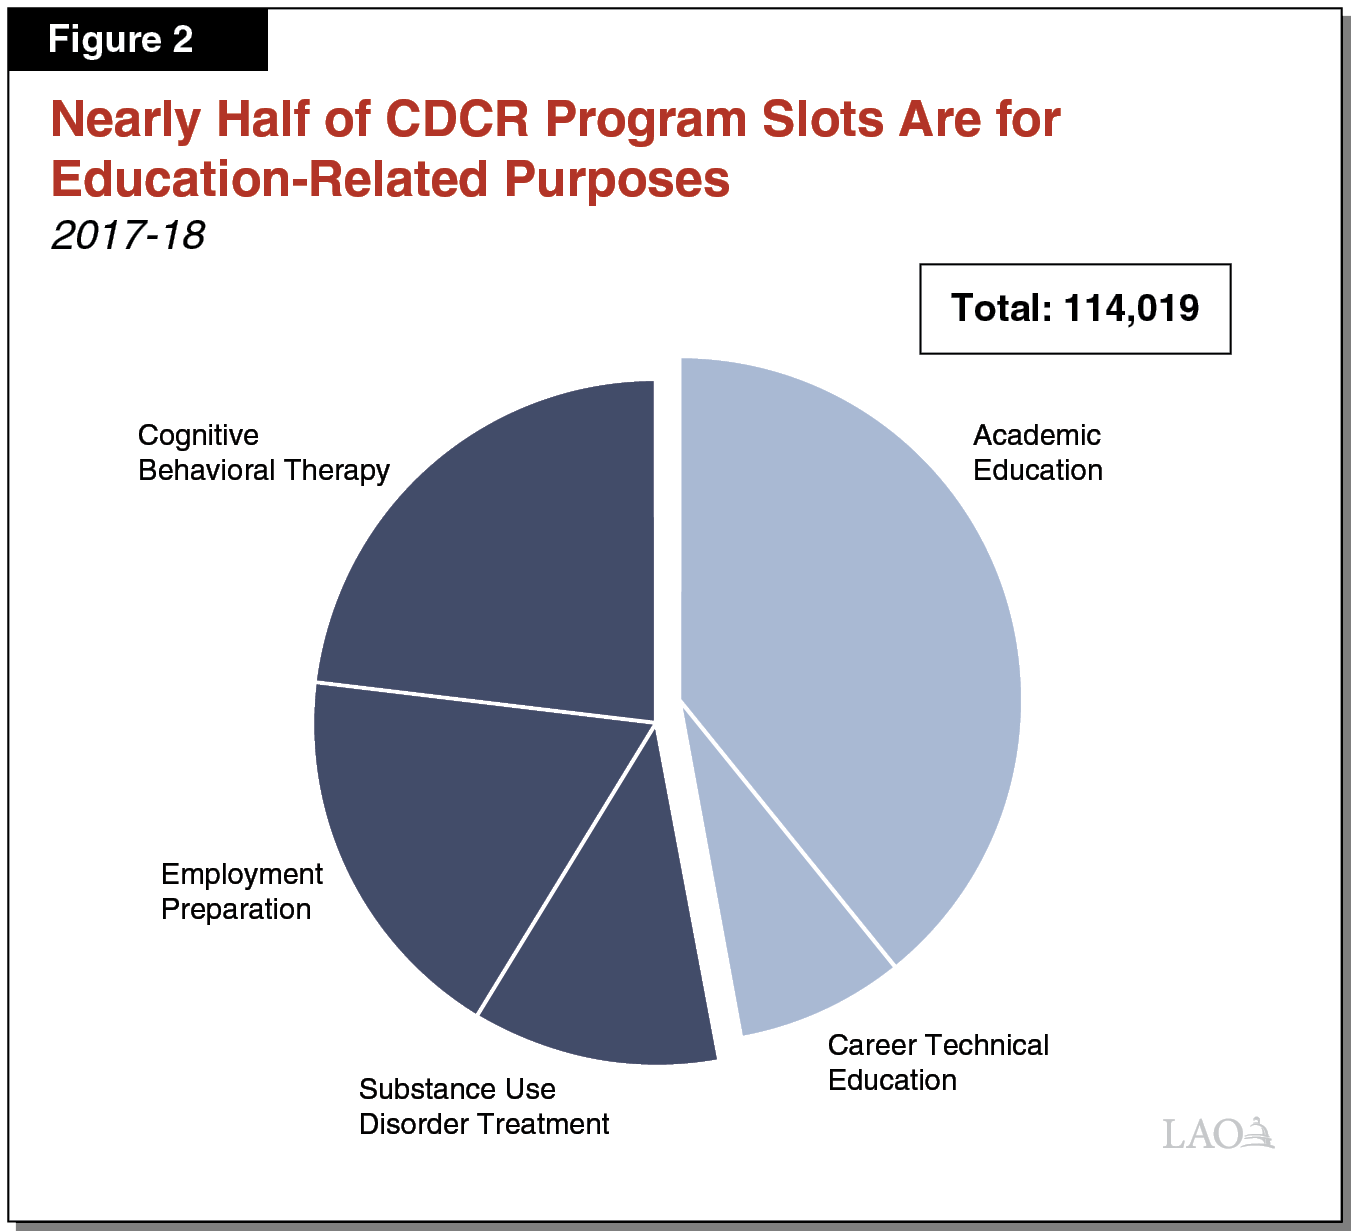 Figure 2 - Nearly Half of Program Slots are for Education-Related Purposes